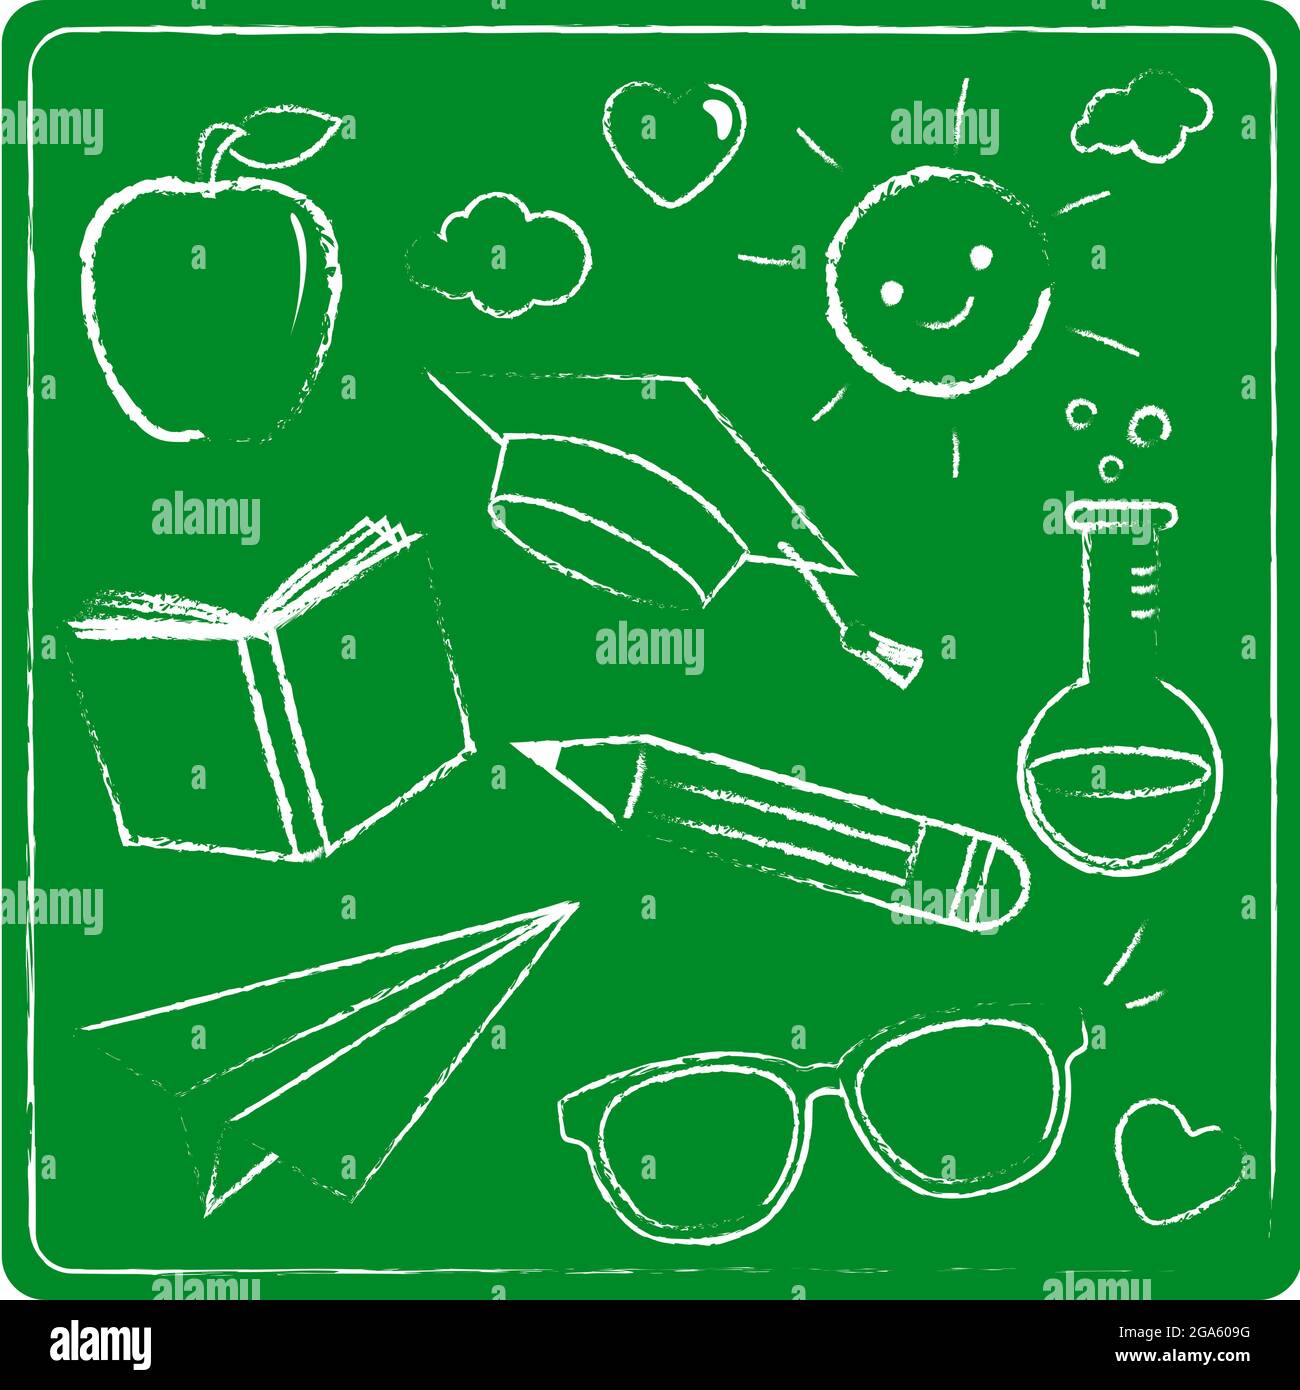 School themed sketch icons on green chalkboard. Stock Photo